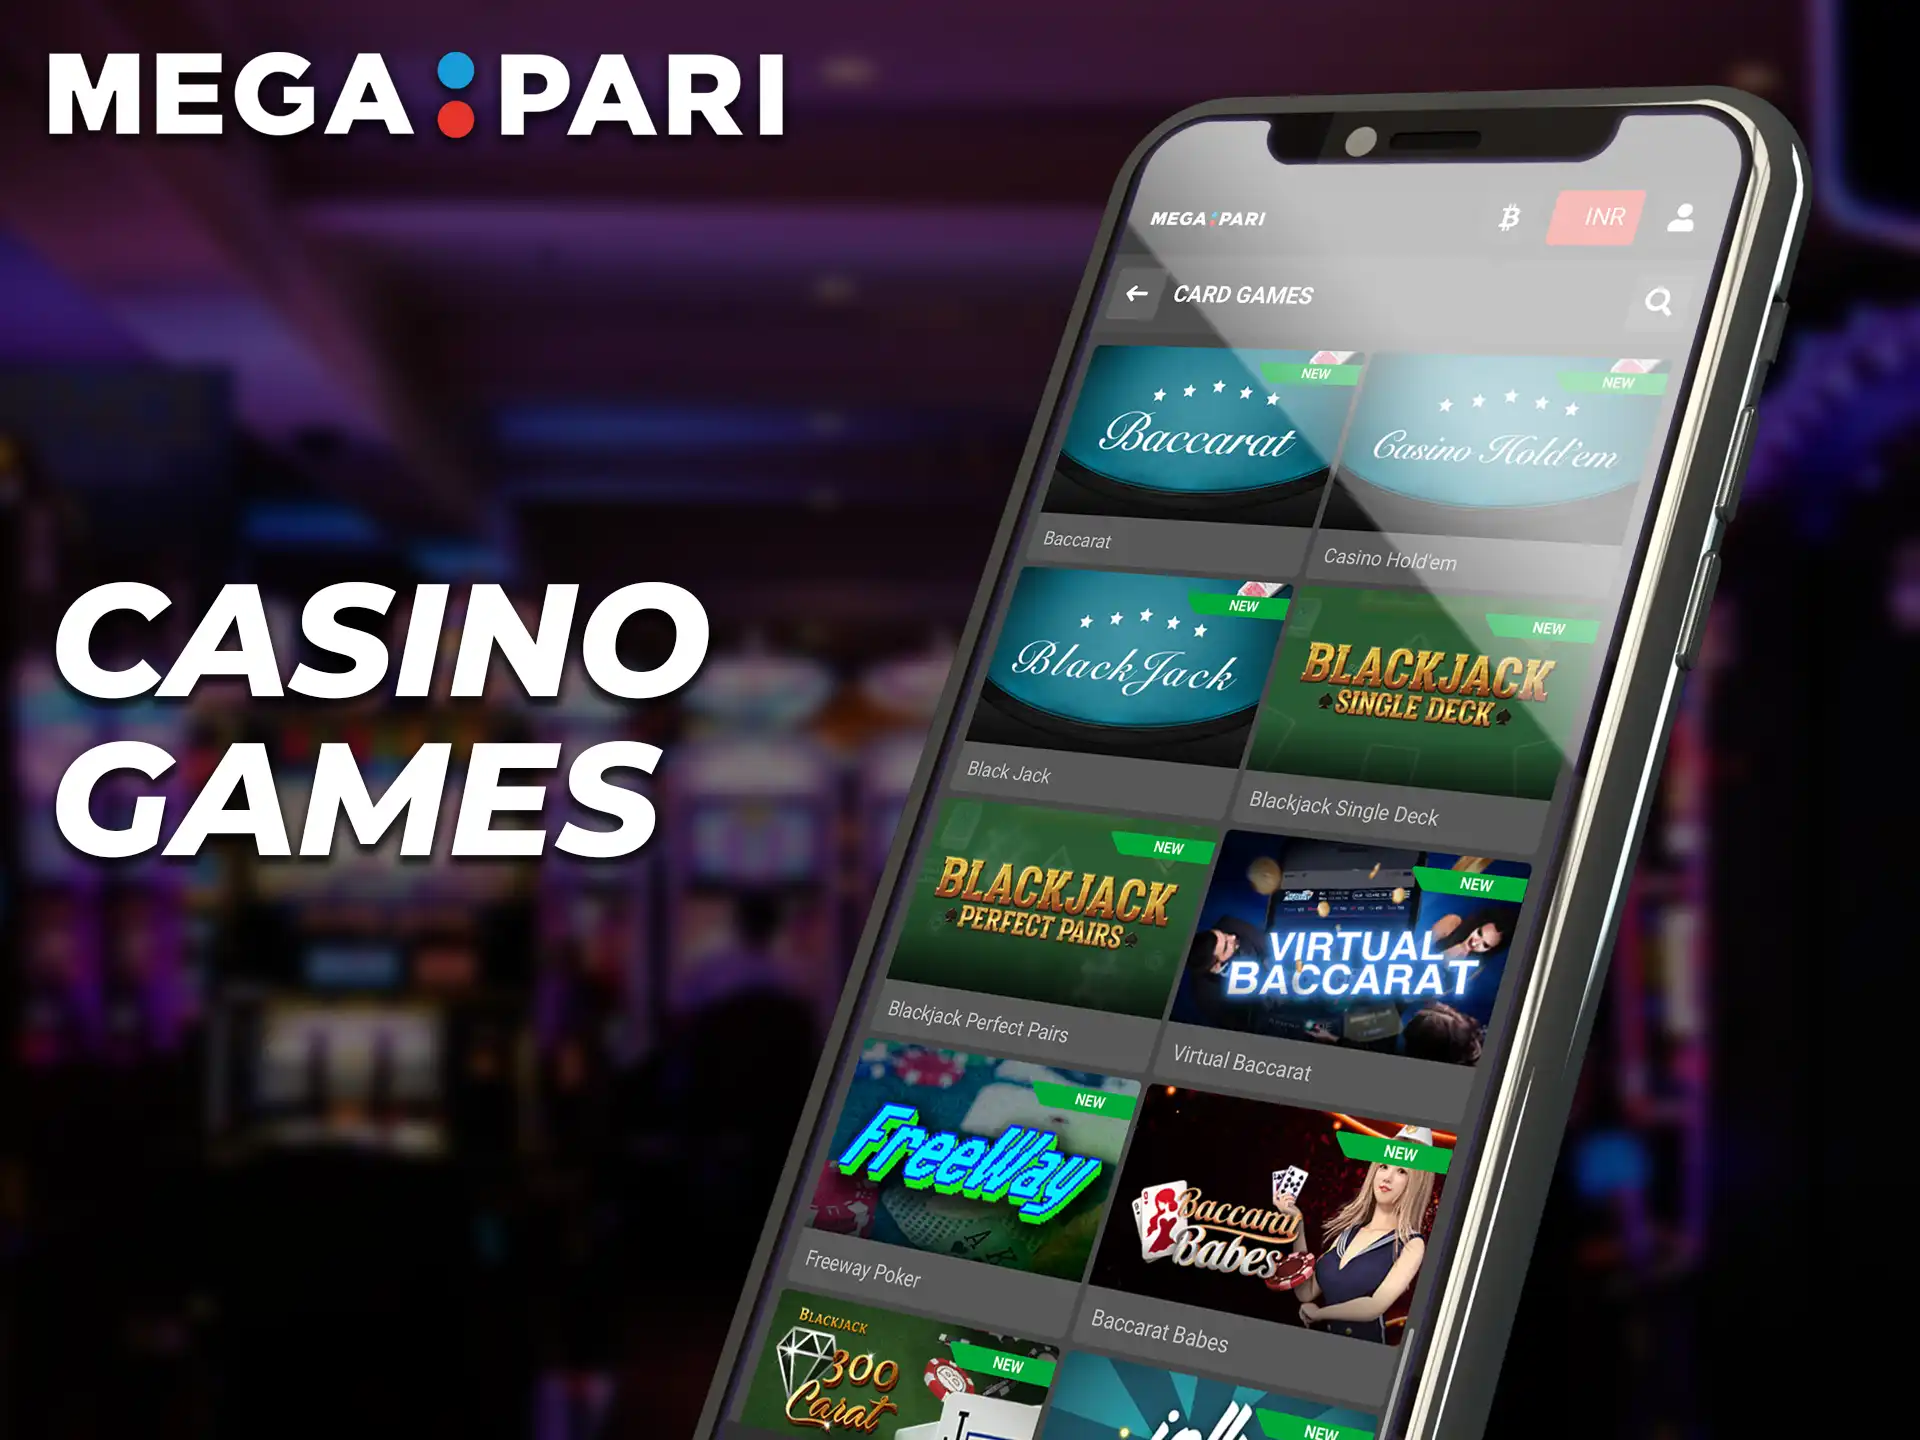 In the Megapari app you can find all the traditional casino games and special bonuses.